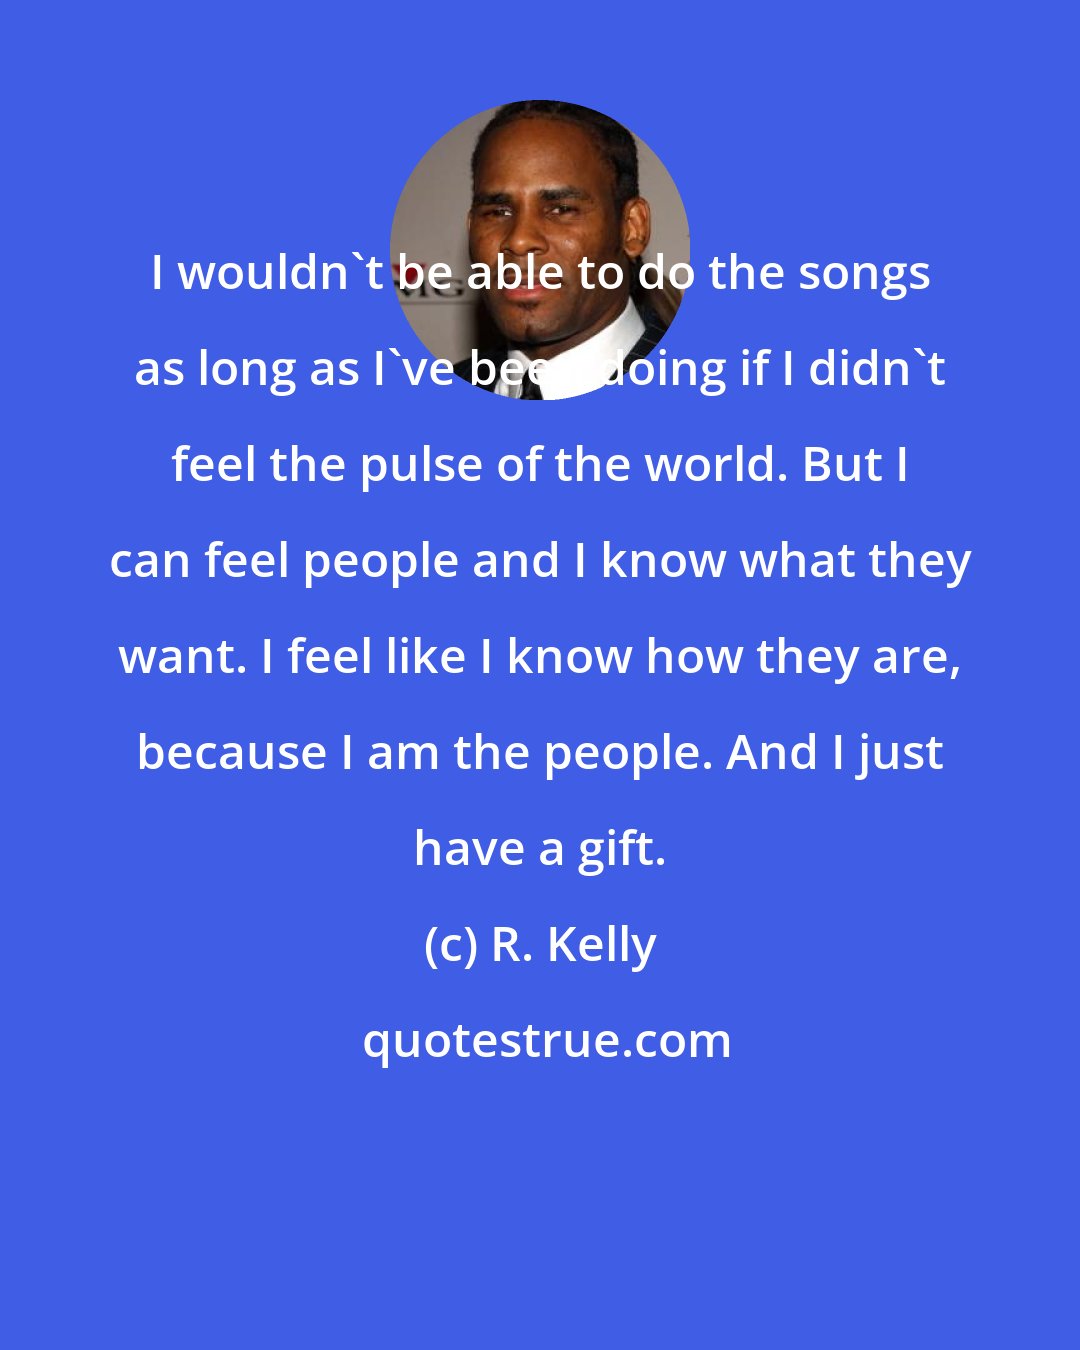 R. Kelly: I wouldn't be able to do the songs as long as I've been doing if I didn't feel the pulse of the world. But I can feel people and I know what they want. I feel like I know how they are, because I am the people. And I just have a gift.